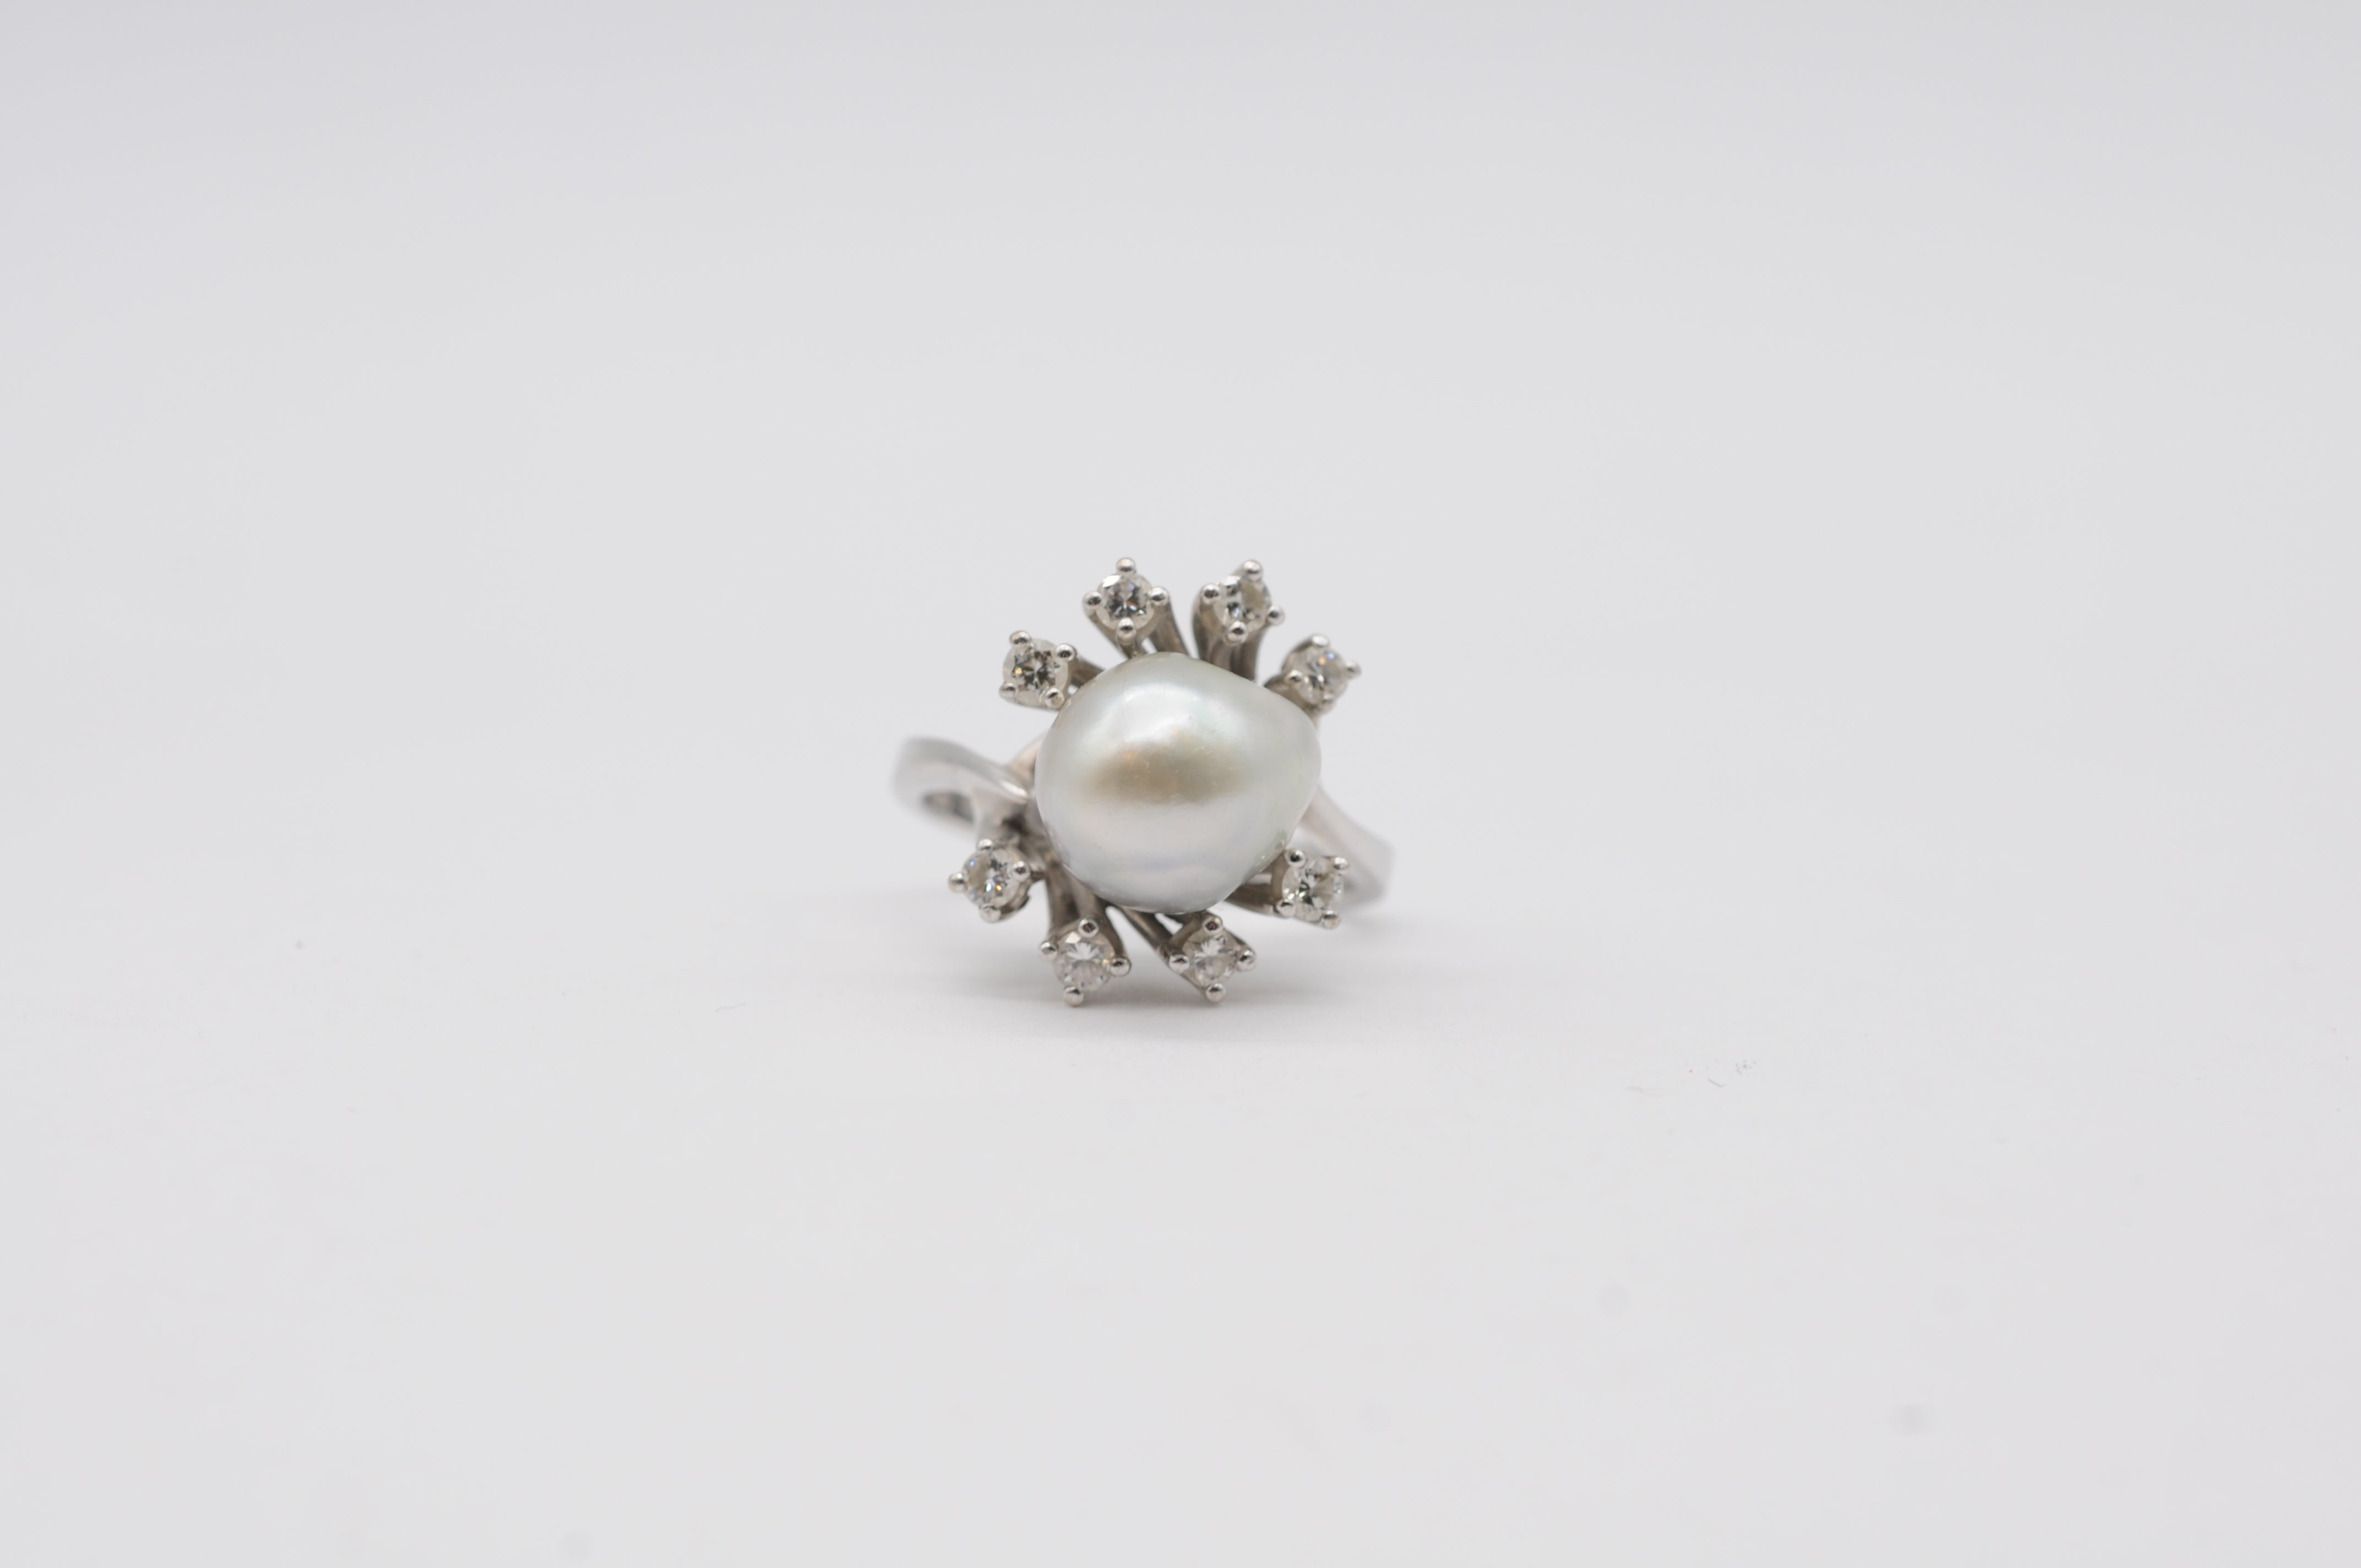 
Certainly! Here's a majestic description in English:

Prepare to be mesmerized by the majestic beauty of this stunning 14k white gold ring, adorned with a lustrous pearl at its center and surrounded by a total of 8 diamonds ranging in size from